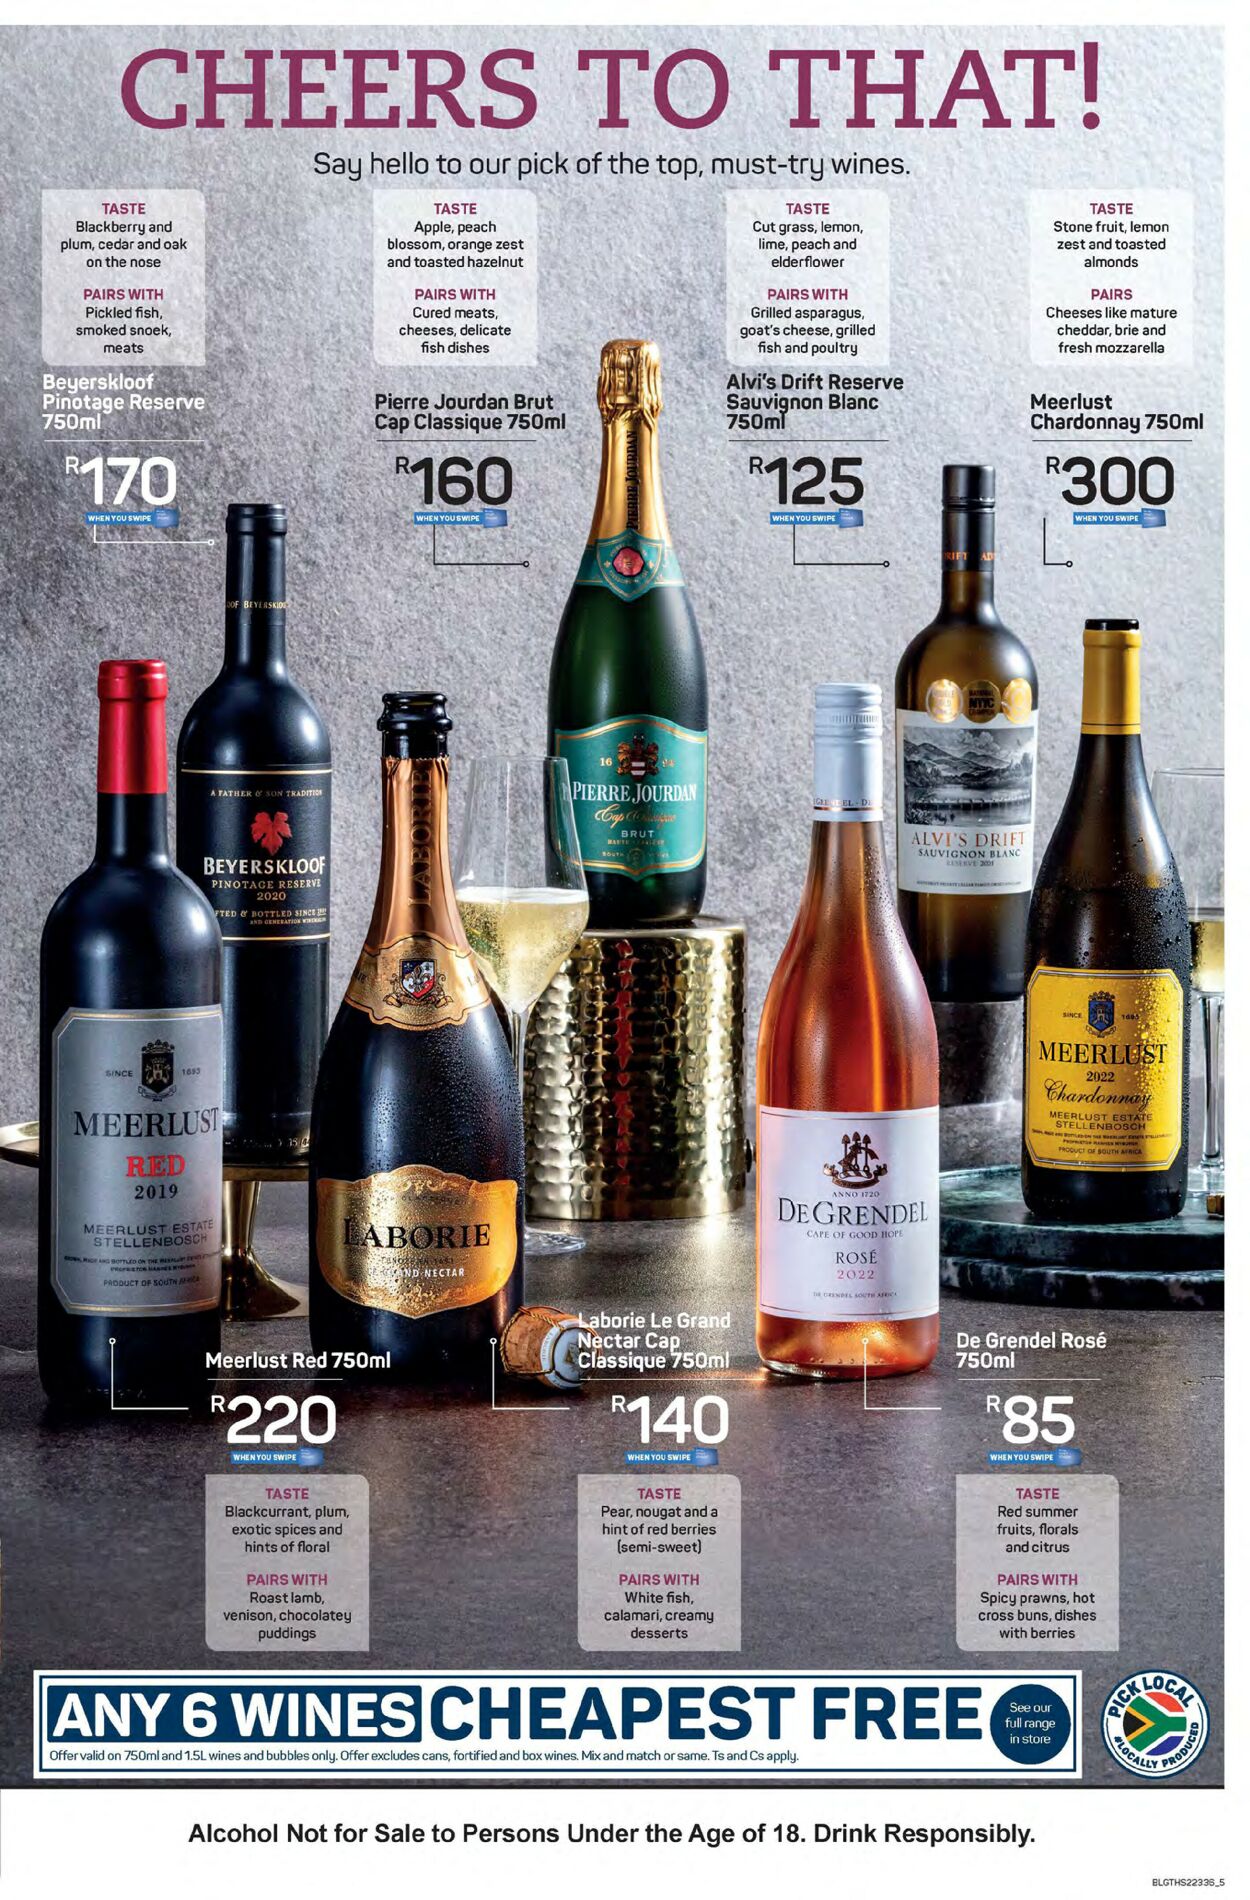 Pick n Pay Catalogue - 2023/03/27-2023/04/02 (Page 5)